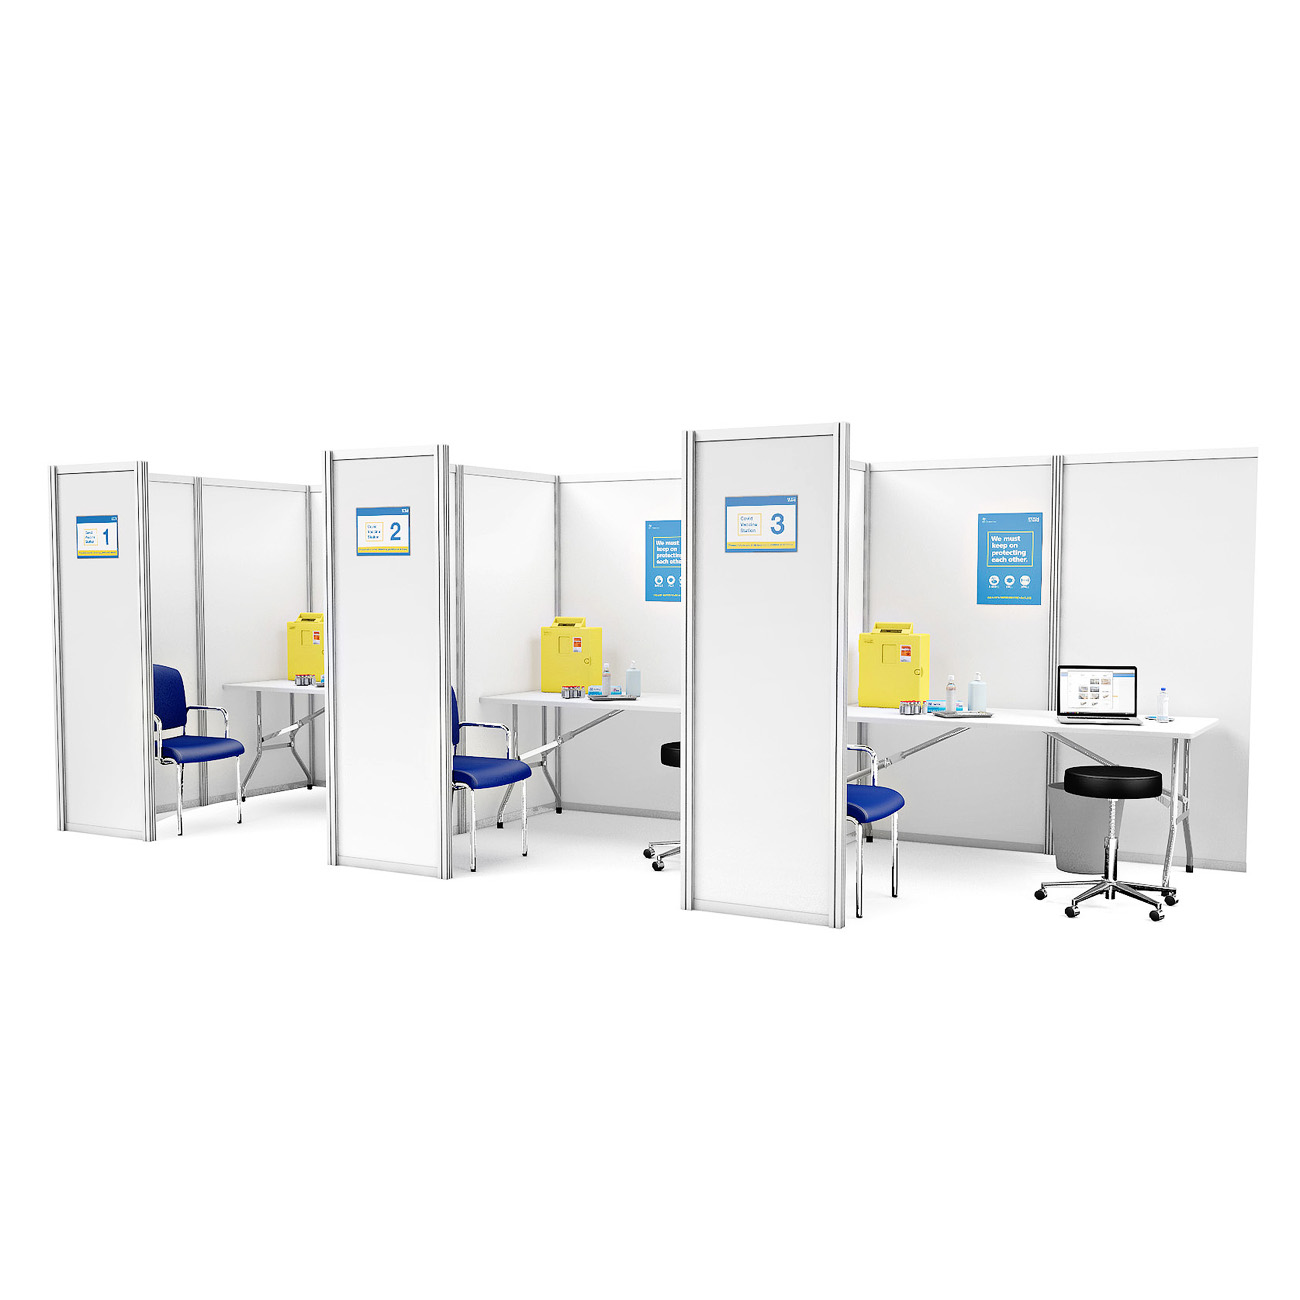 Freestanding, Modular COVID Vaccination Pods Are Constructed From Aluminium Frames And Opaque White Foamex Panels - Clean, Wipeable & Hygienic